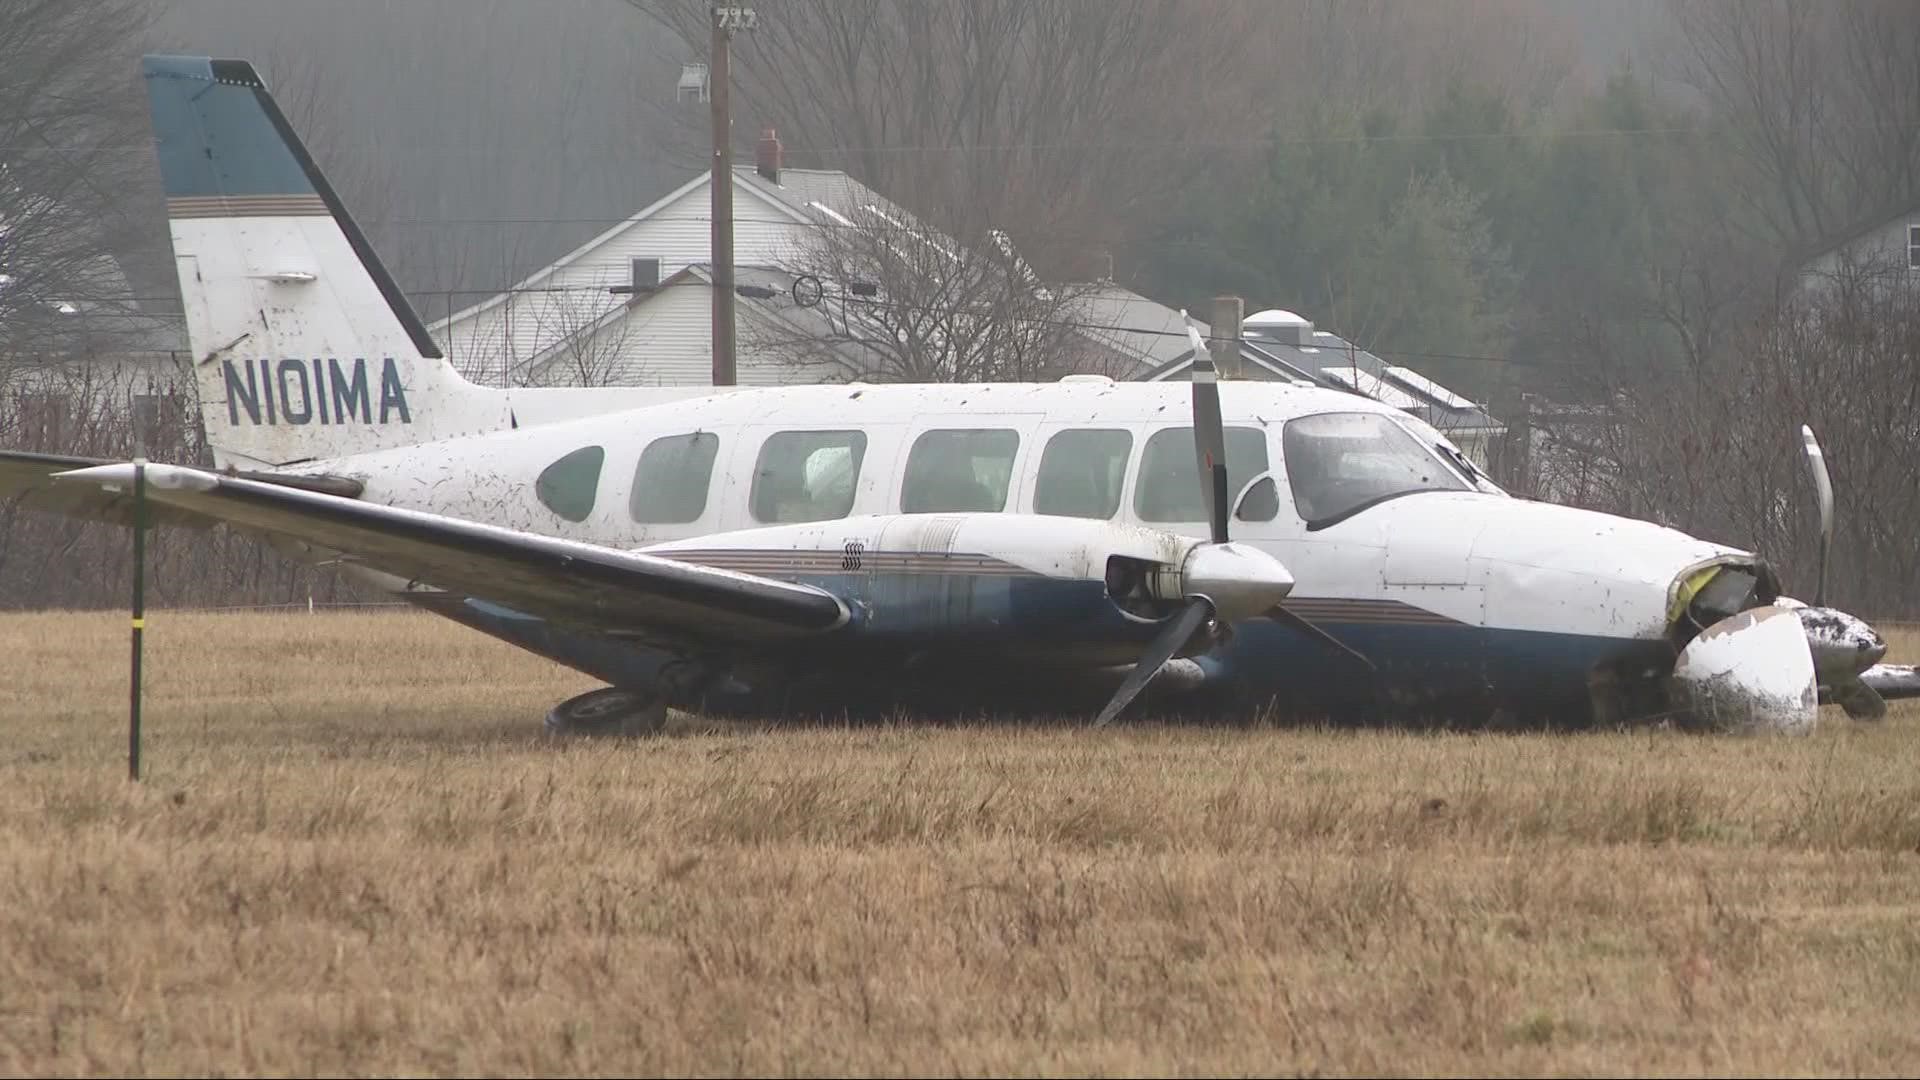 A plane crash occurred at the Geauga County Airport on Wednesday morning. Six people were on board with no injuries reported at this time.